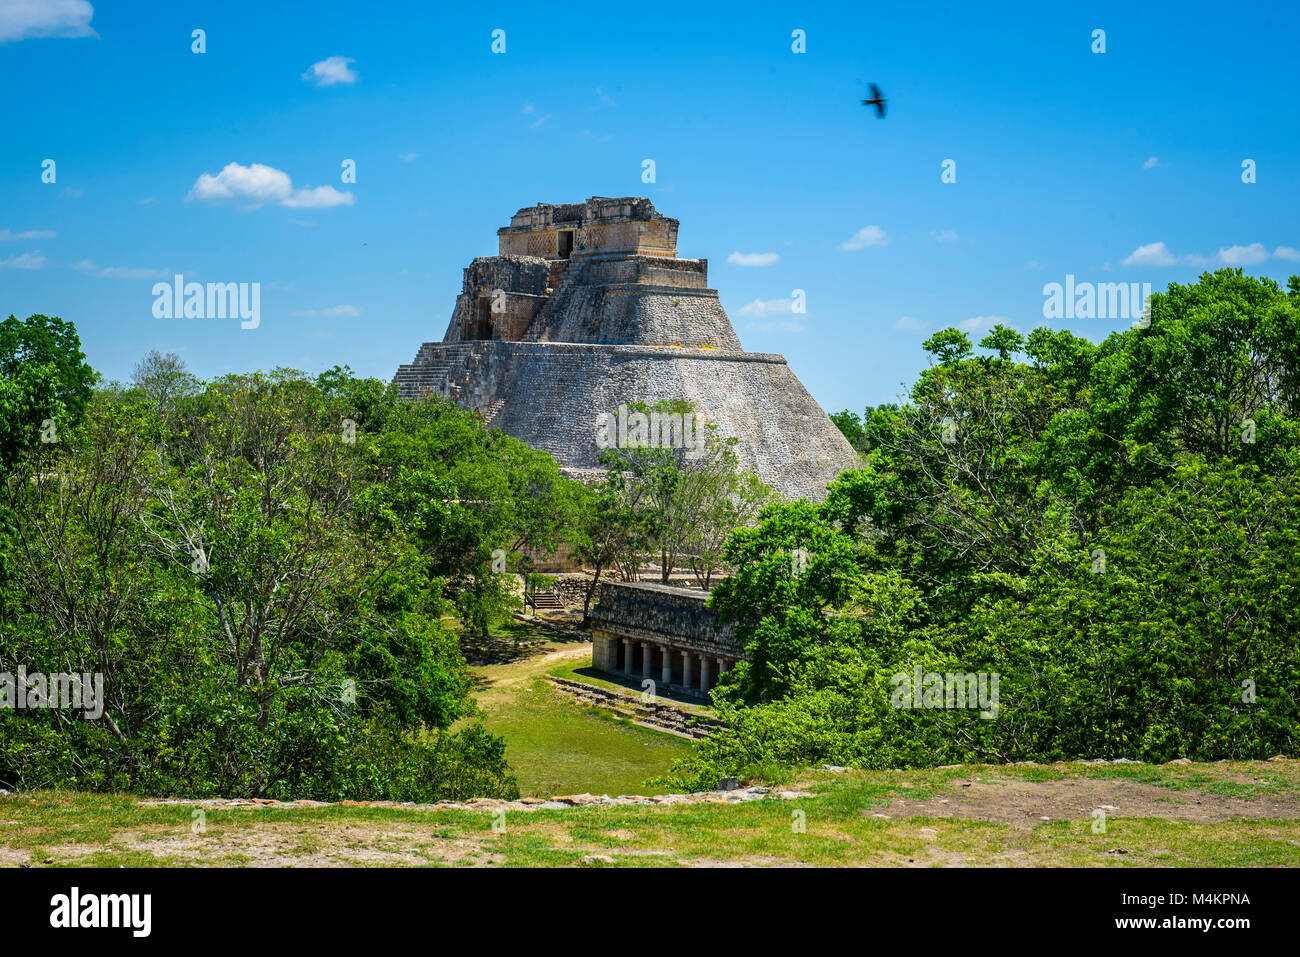 View to the Pyramid of the Magician in prehispanic Mayan city of Uxmal Archaeological Site, Yucatan Province, Mexico, North America Stock Photo